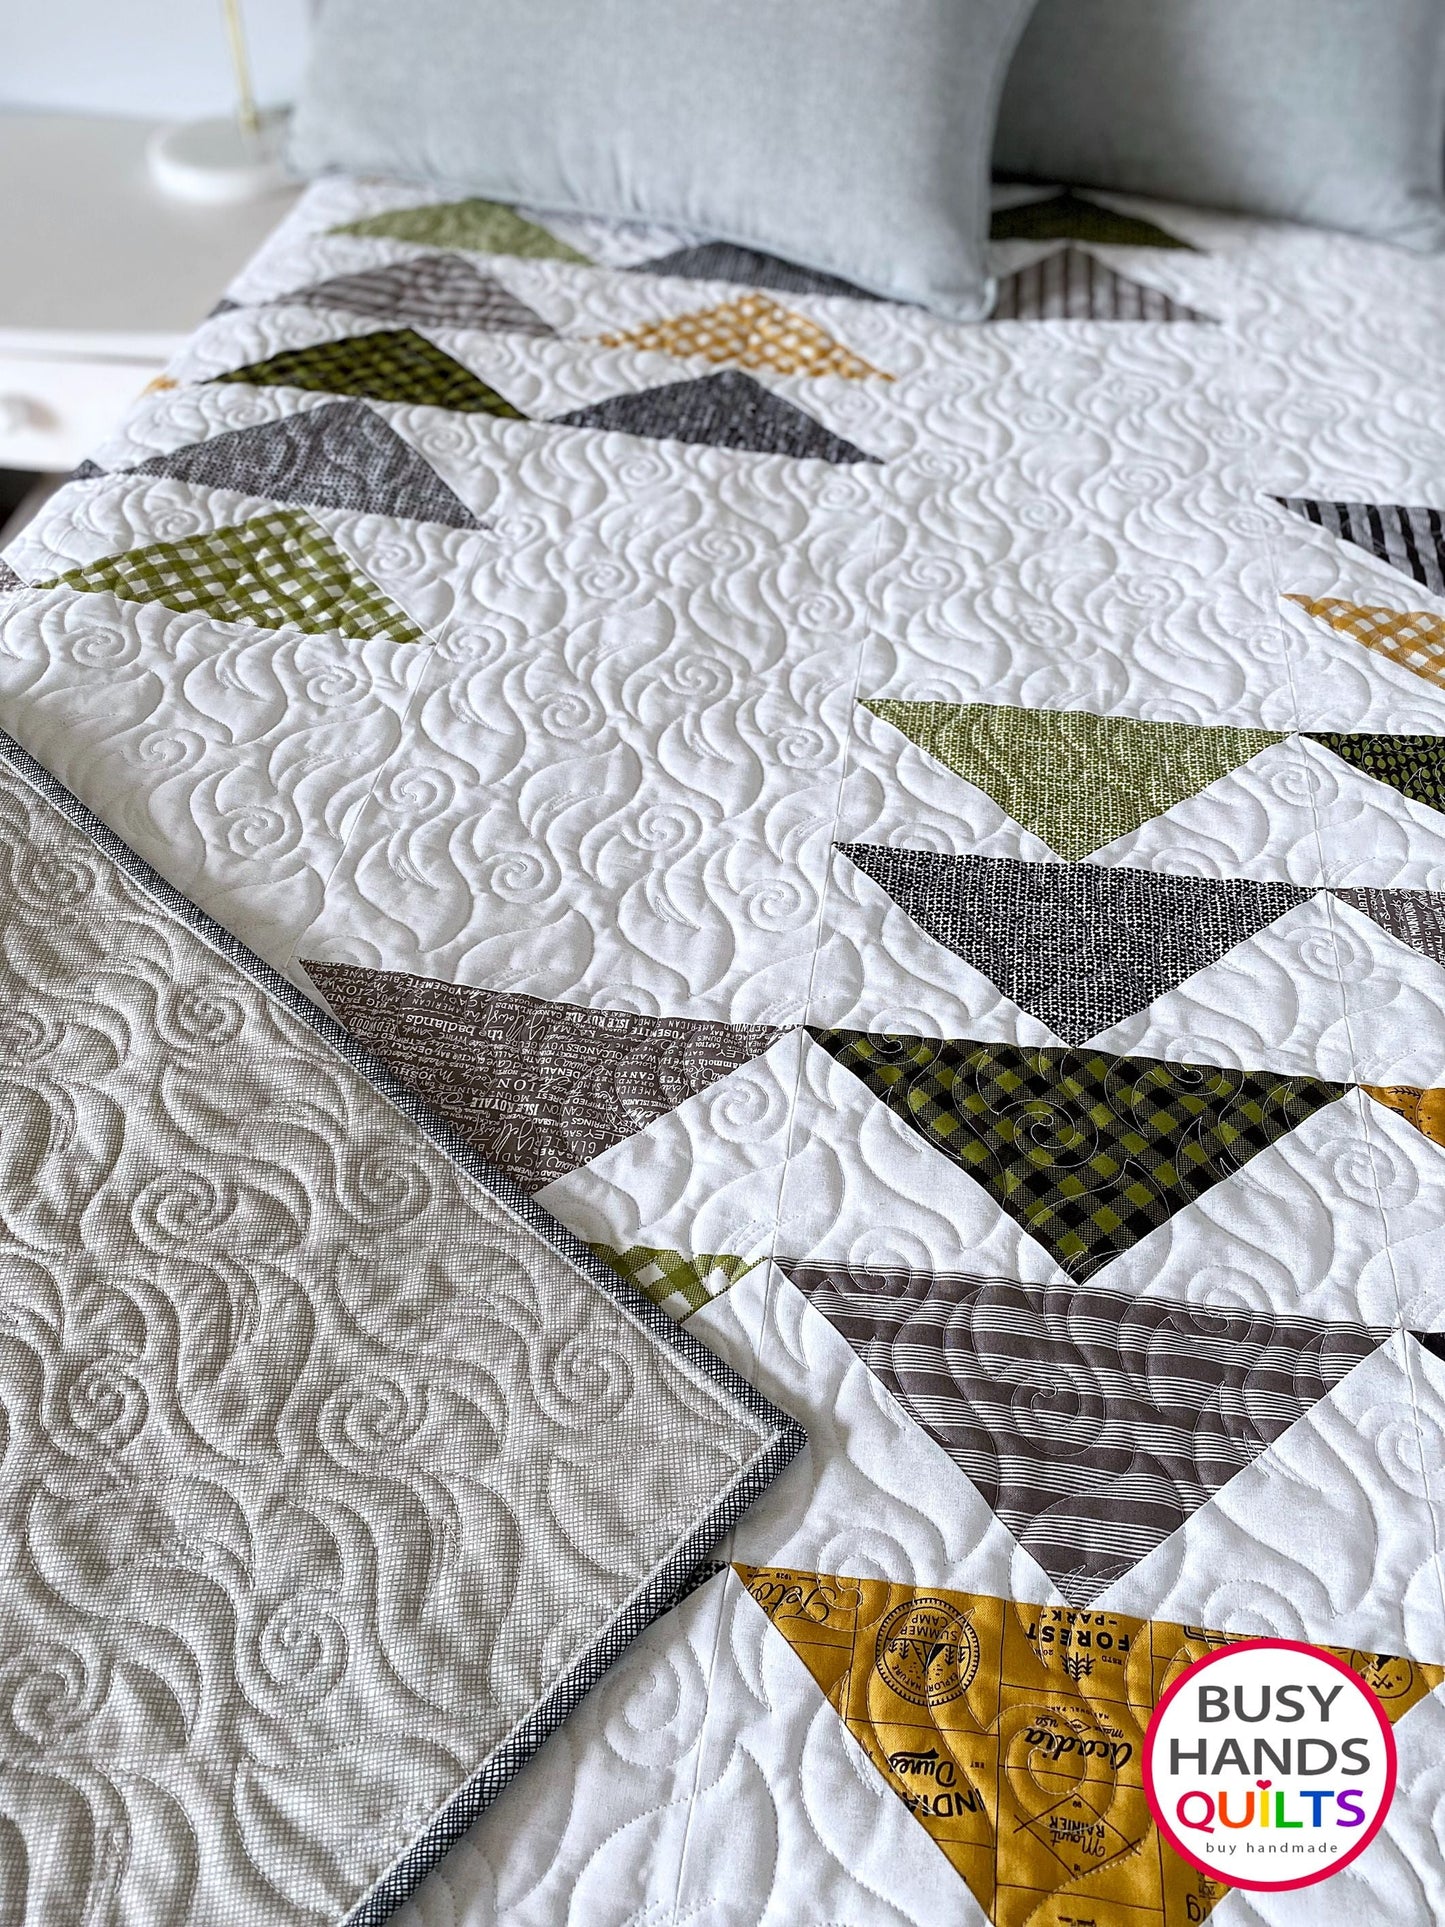 Custom Handmade Formation Throw Quilt in Timber - Ready to Ship Busy Hands Quilts $365